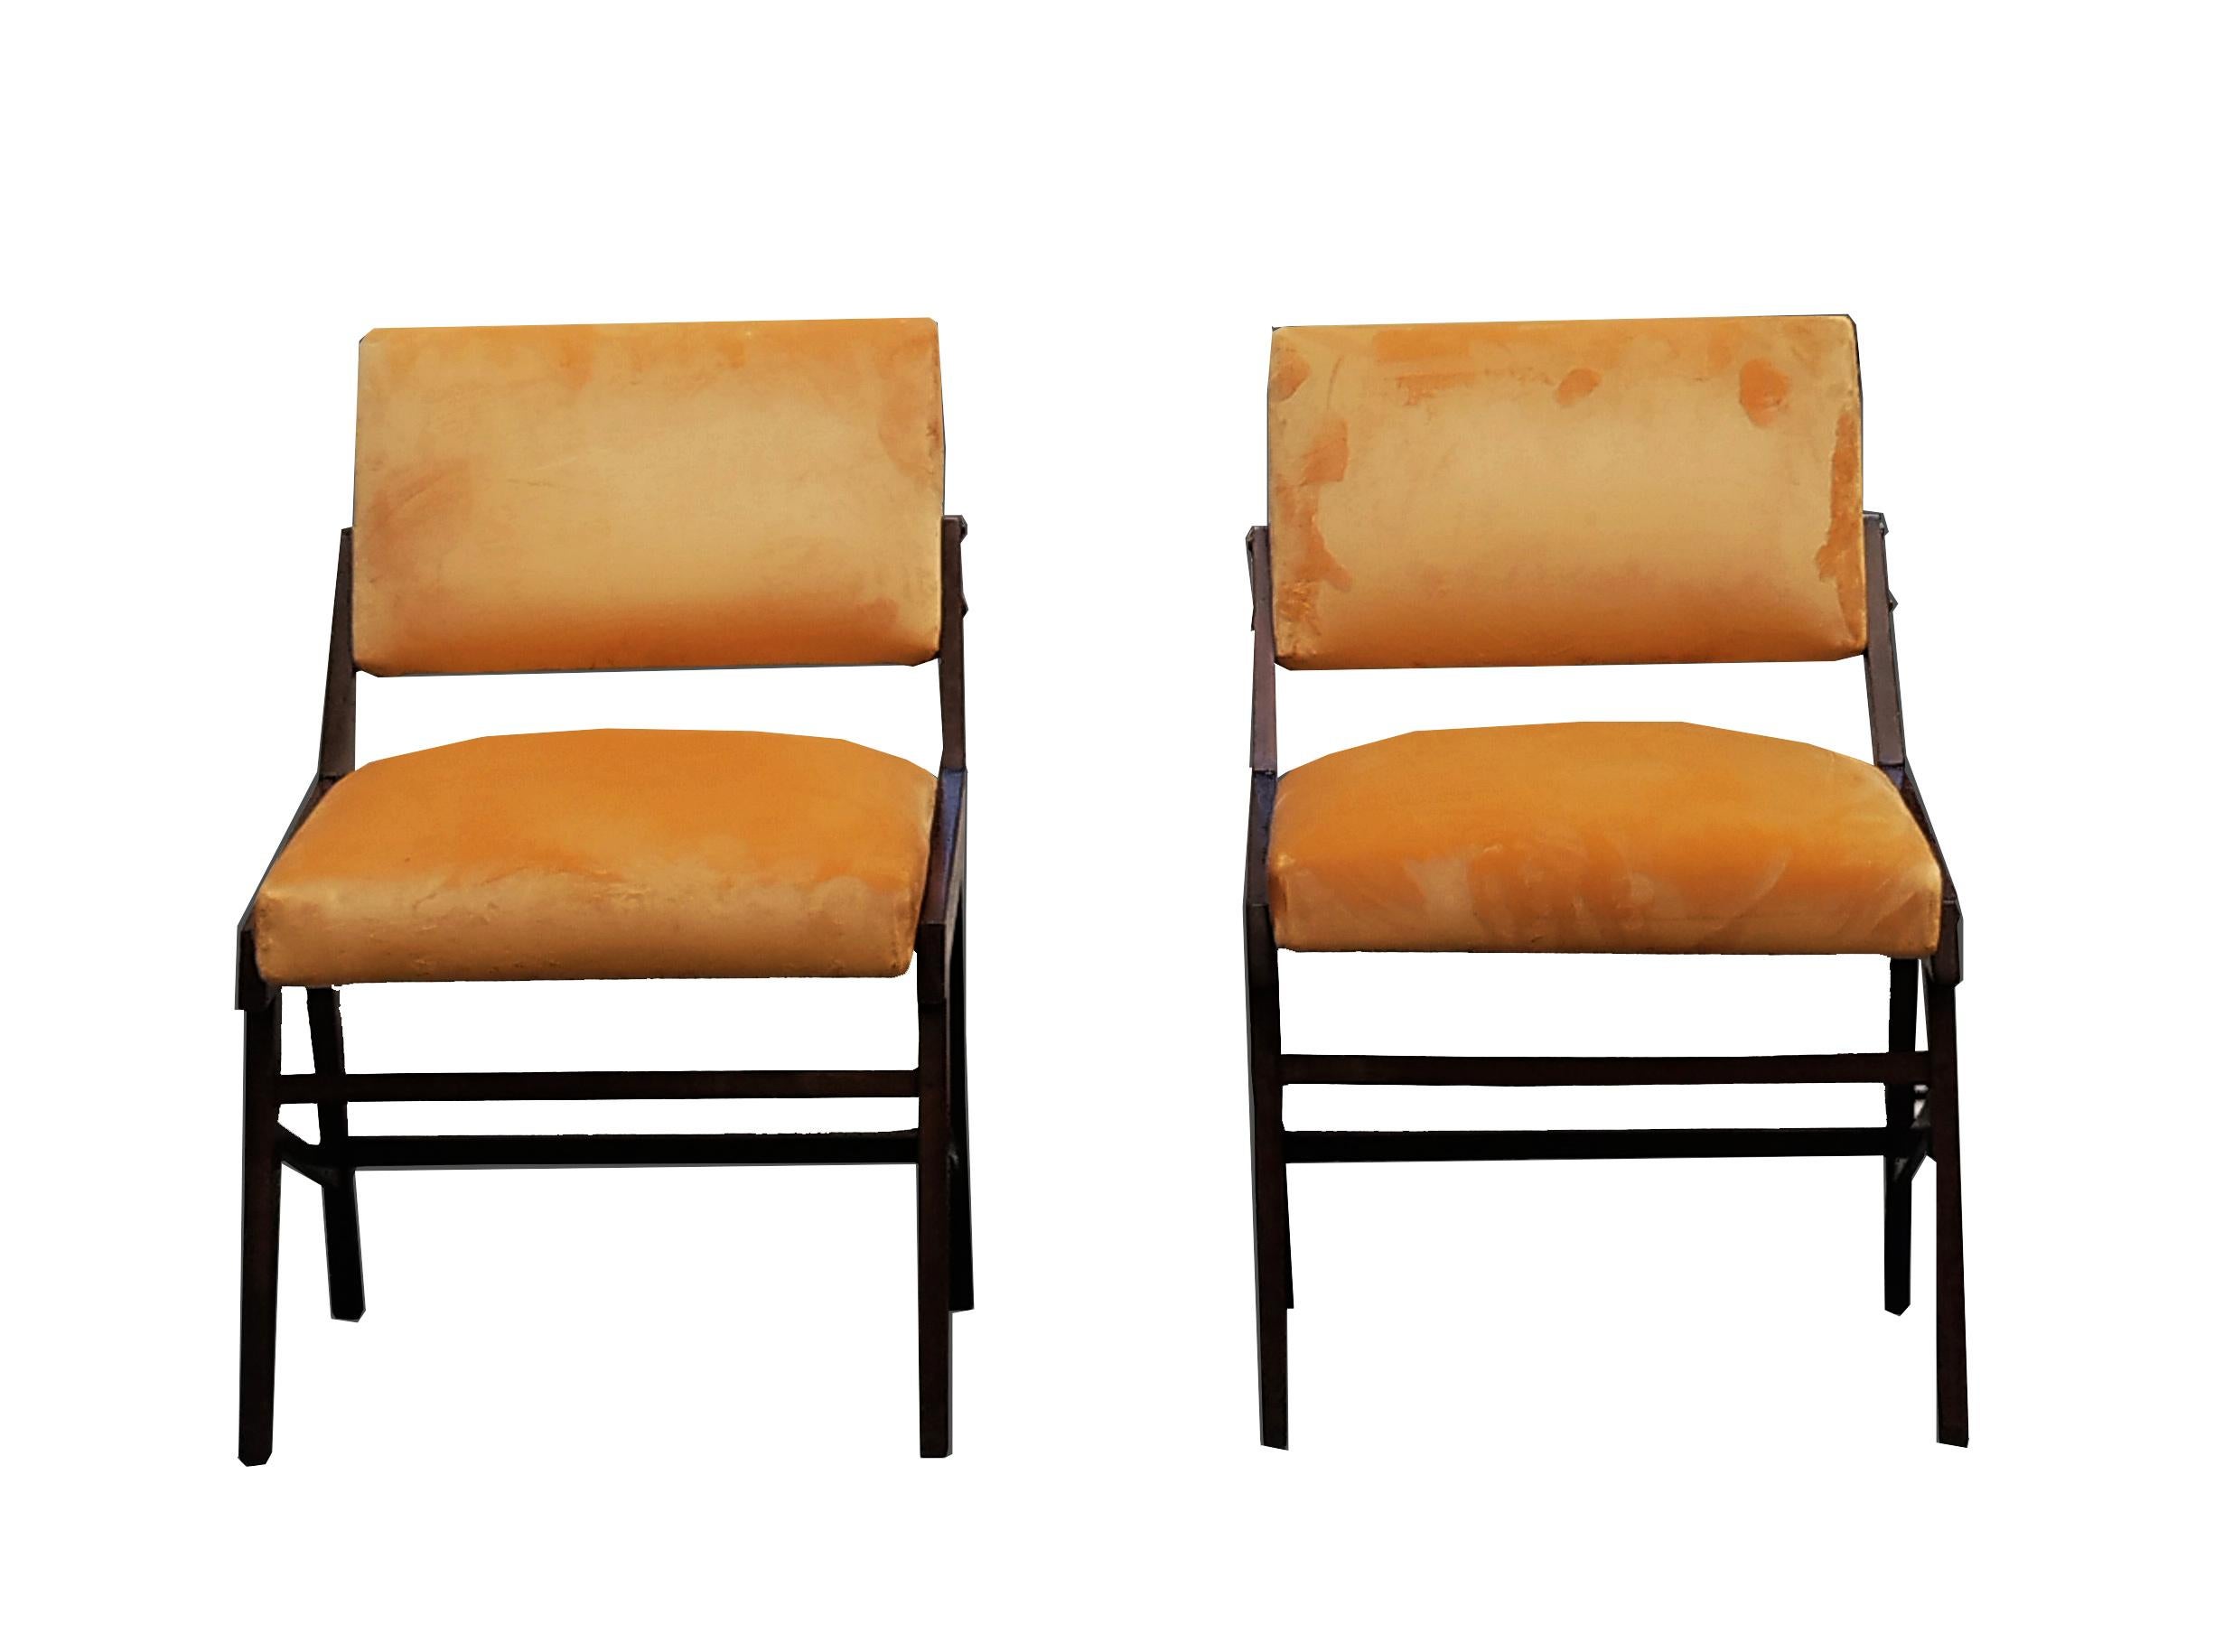 Set of two wooden chairs, peach velvet seat and back, in the style of Ico Parisi, 1960s